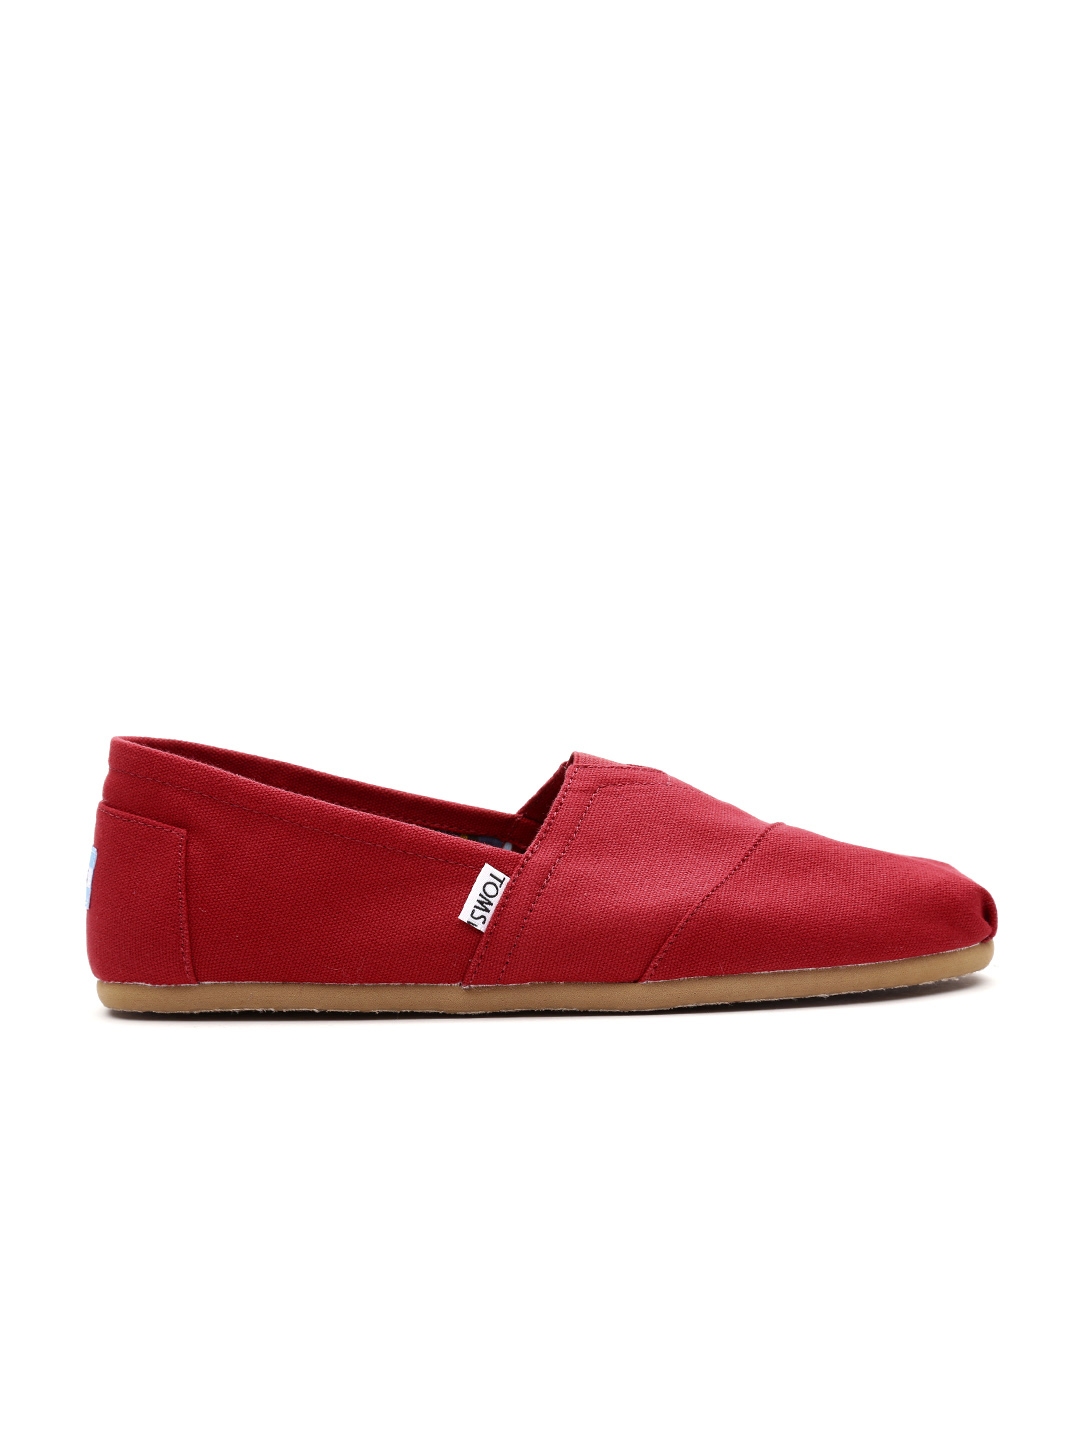 Buy TOMS Men Red Canvas Slip Ons - Casual Shoes for Men 1423634 | Myntra